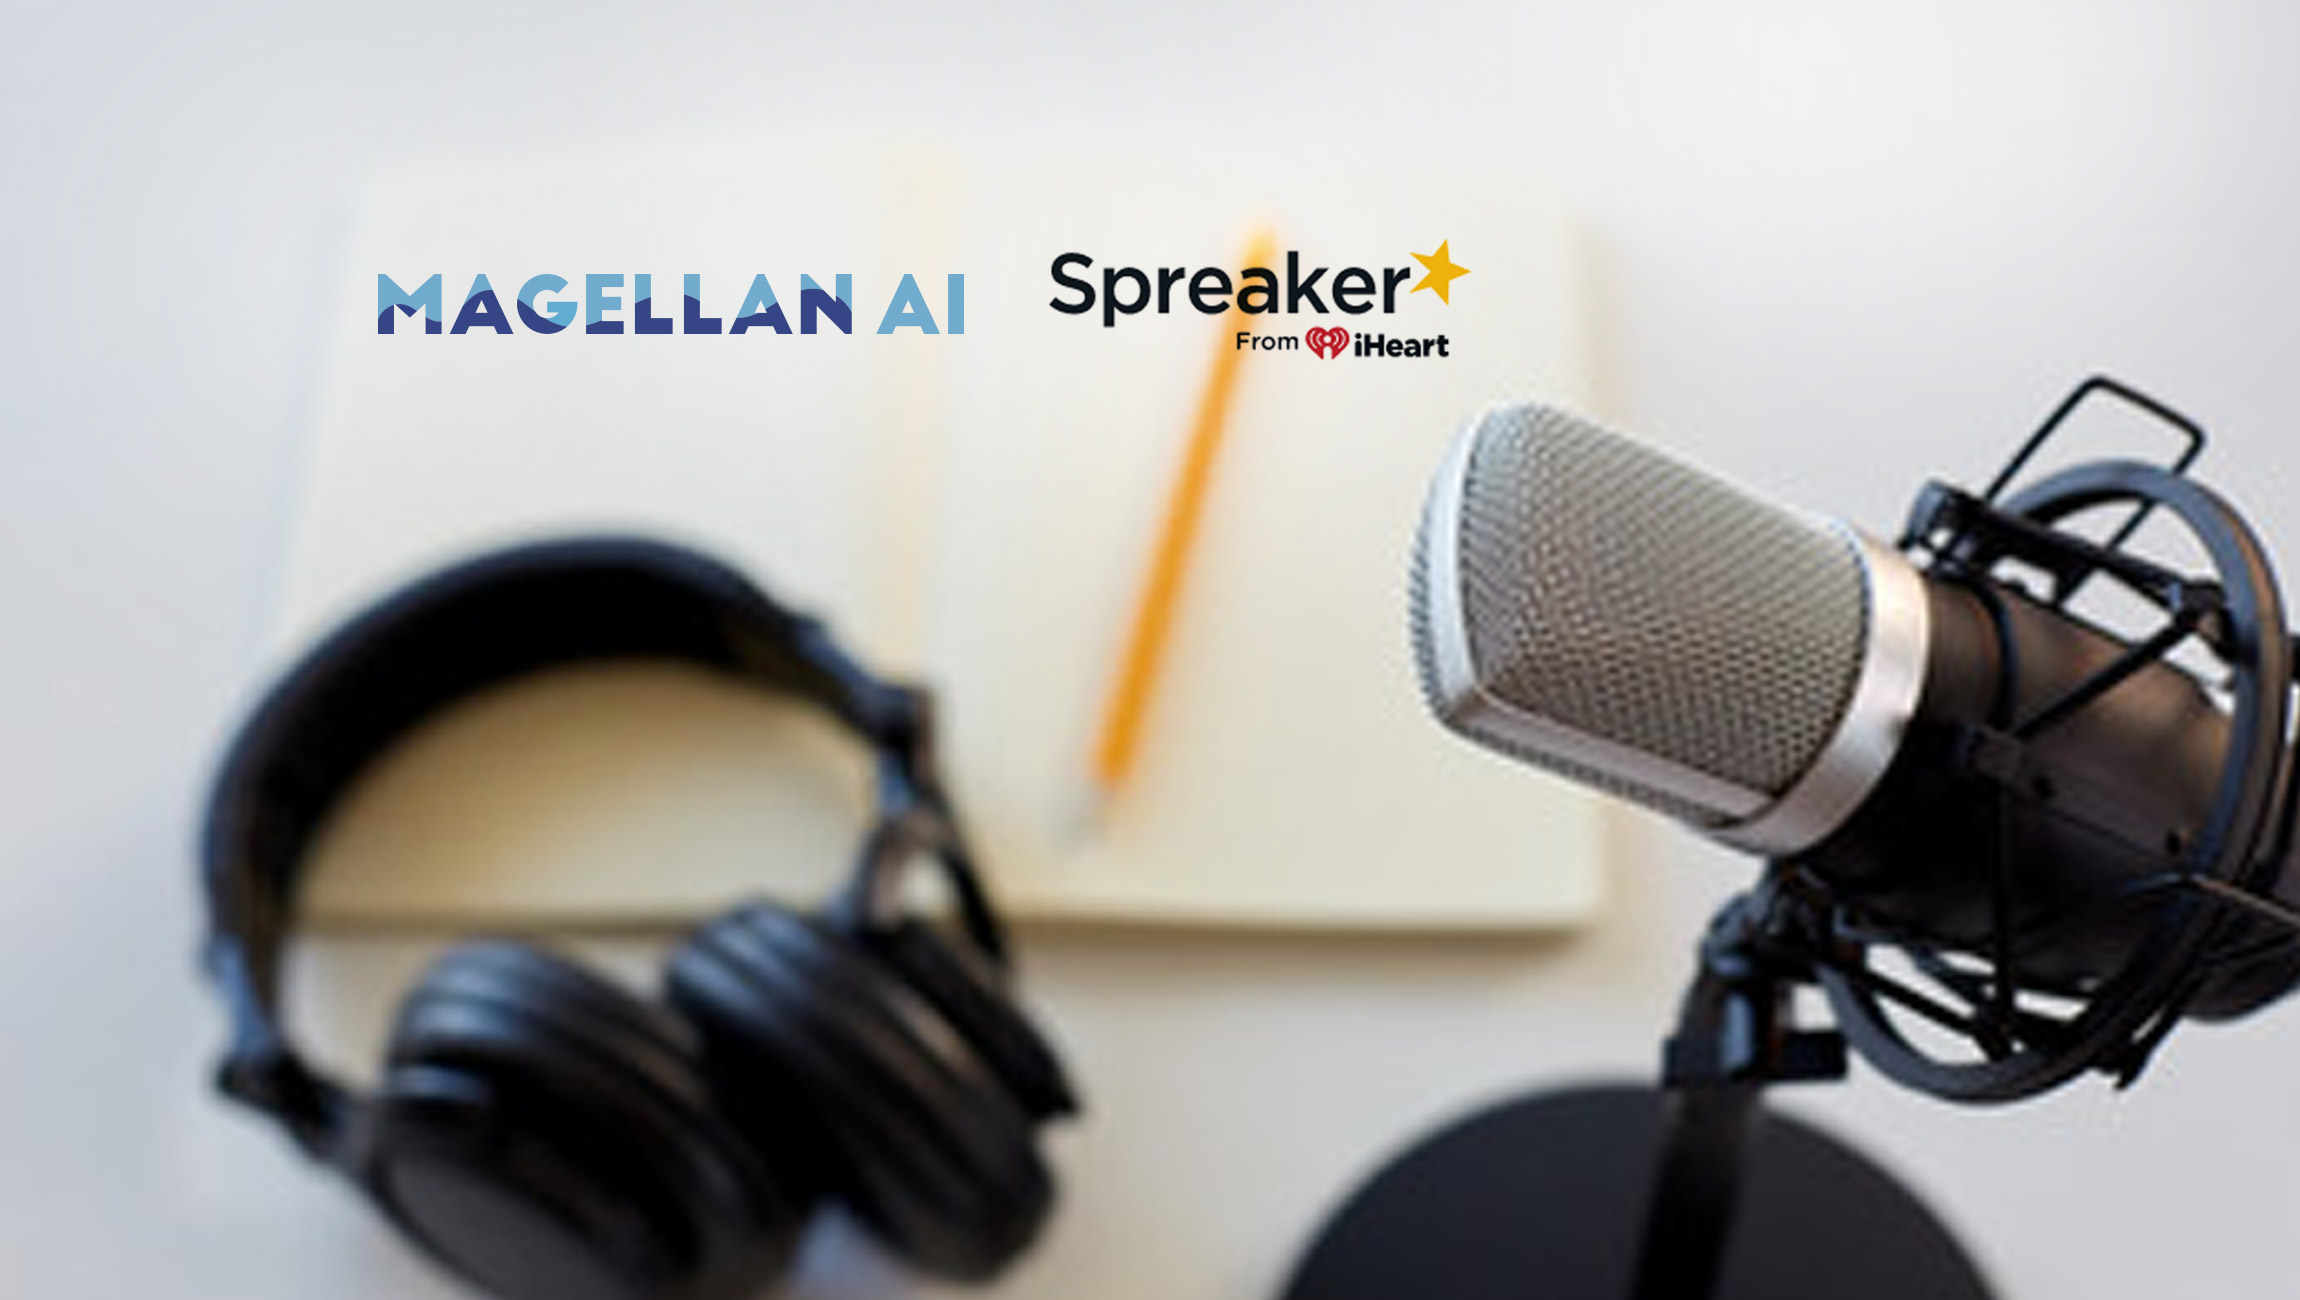 Magellan AI Verified as a Third-Party Attribution Partner by Spreaker from iHeart 1